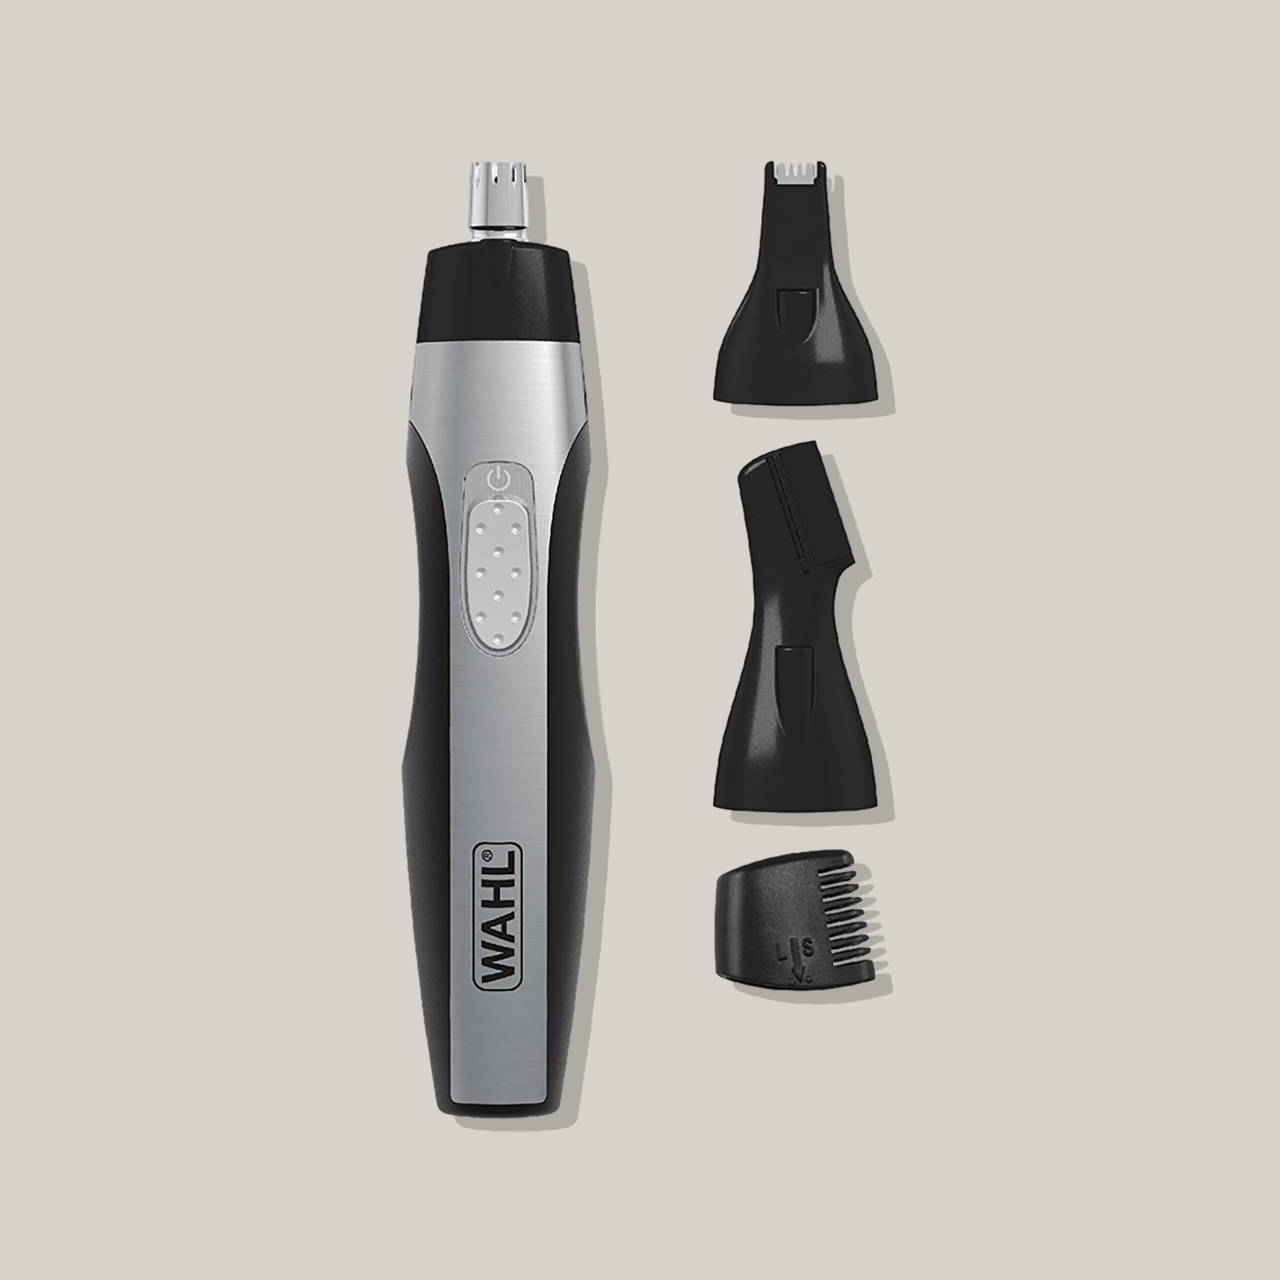 Wahl Lithium Lighted Detailer #5572 